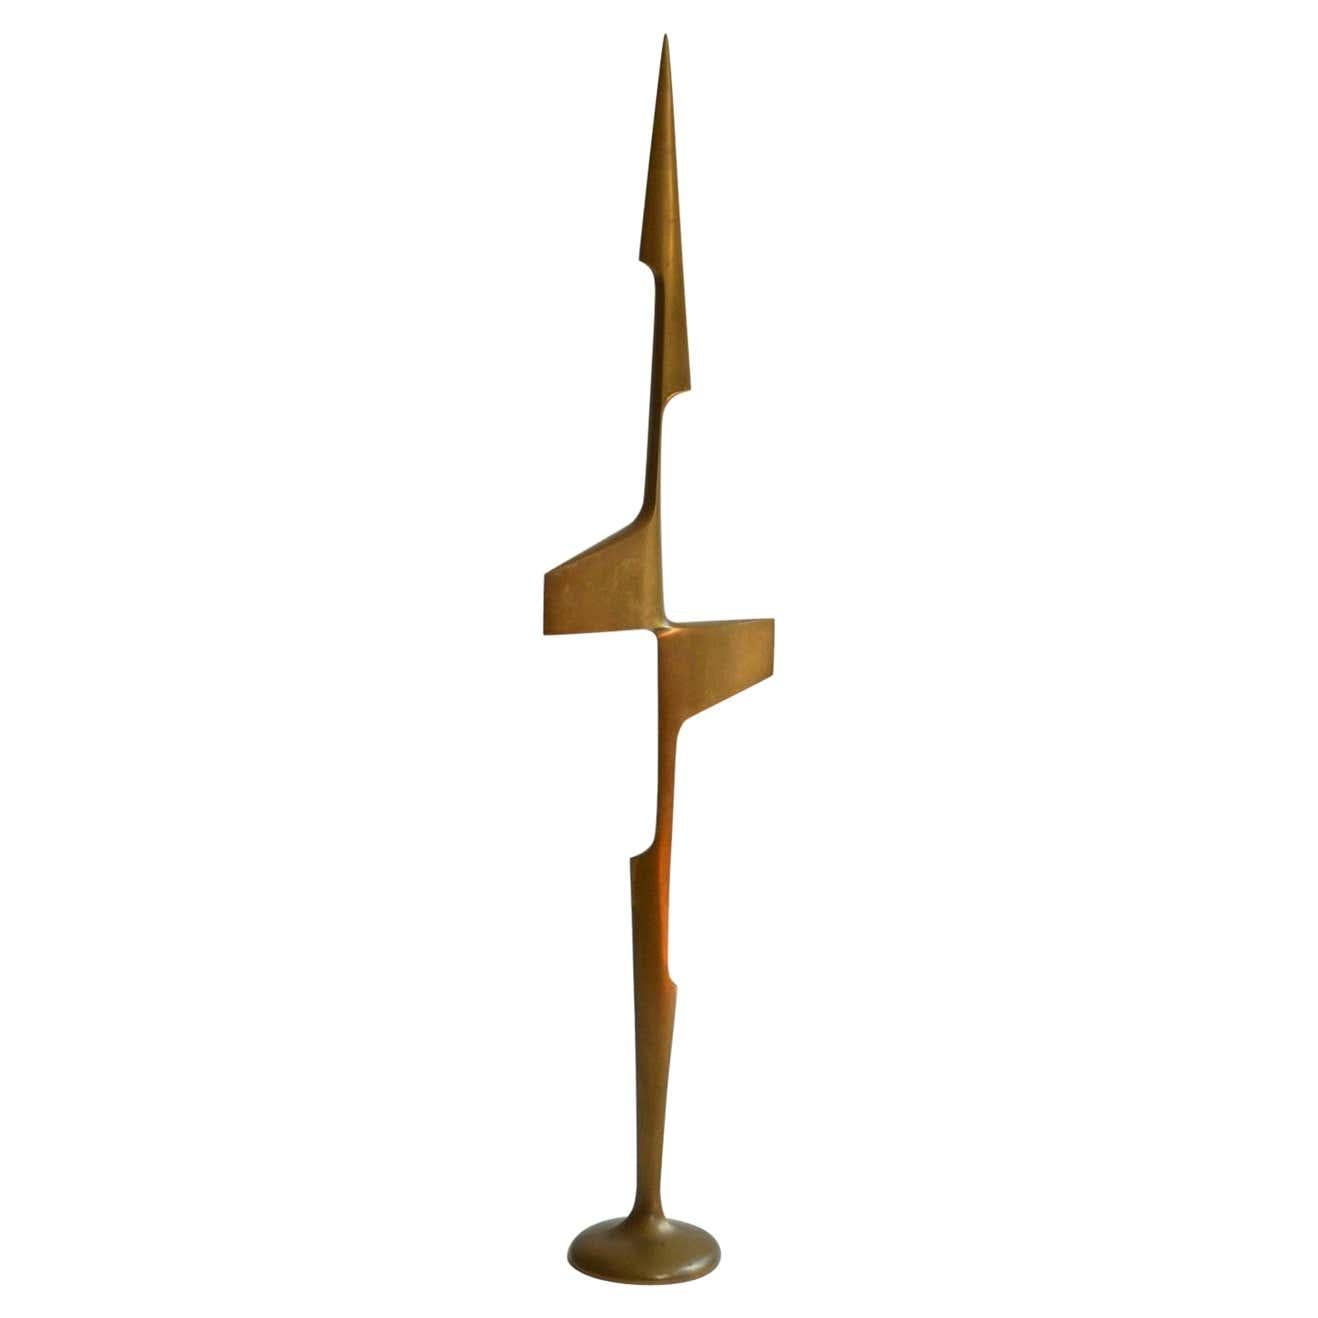 Three abstract cast bronze sculptures stands proud in take-off to create the lift for an upward jump, a generated airflow in take-off and a pedestal suggesting birds in-flight. These sculptures are aerodynamic design creating a dynamism of the